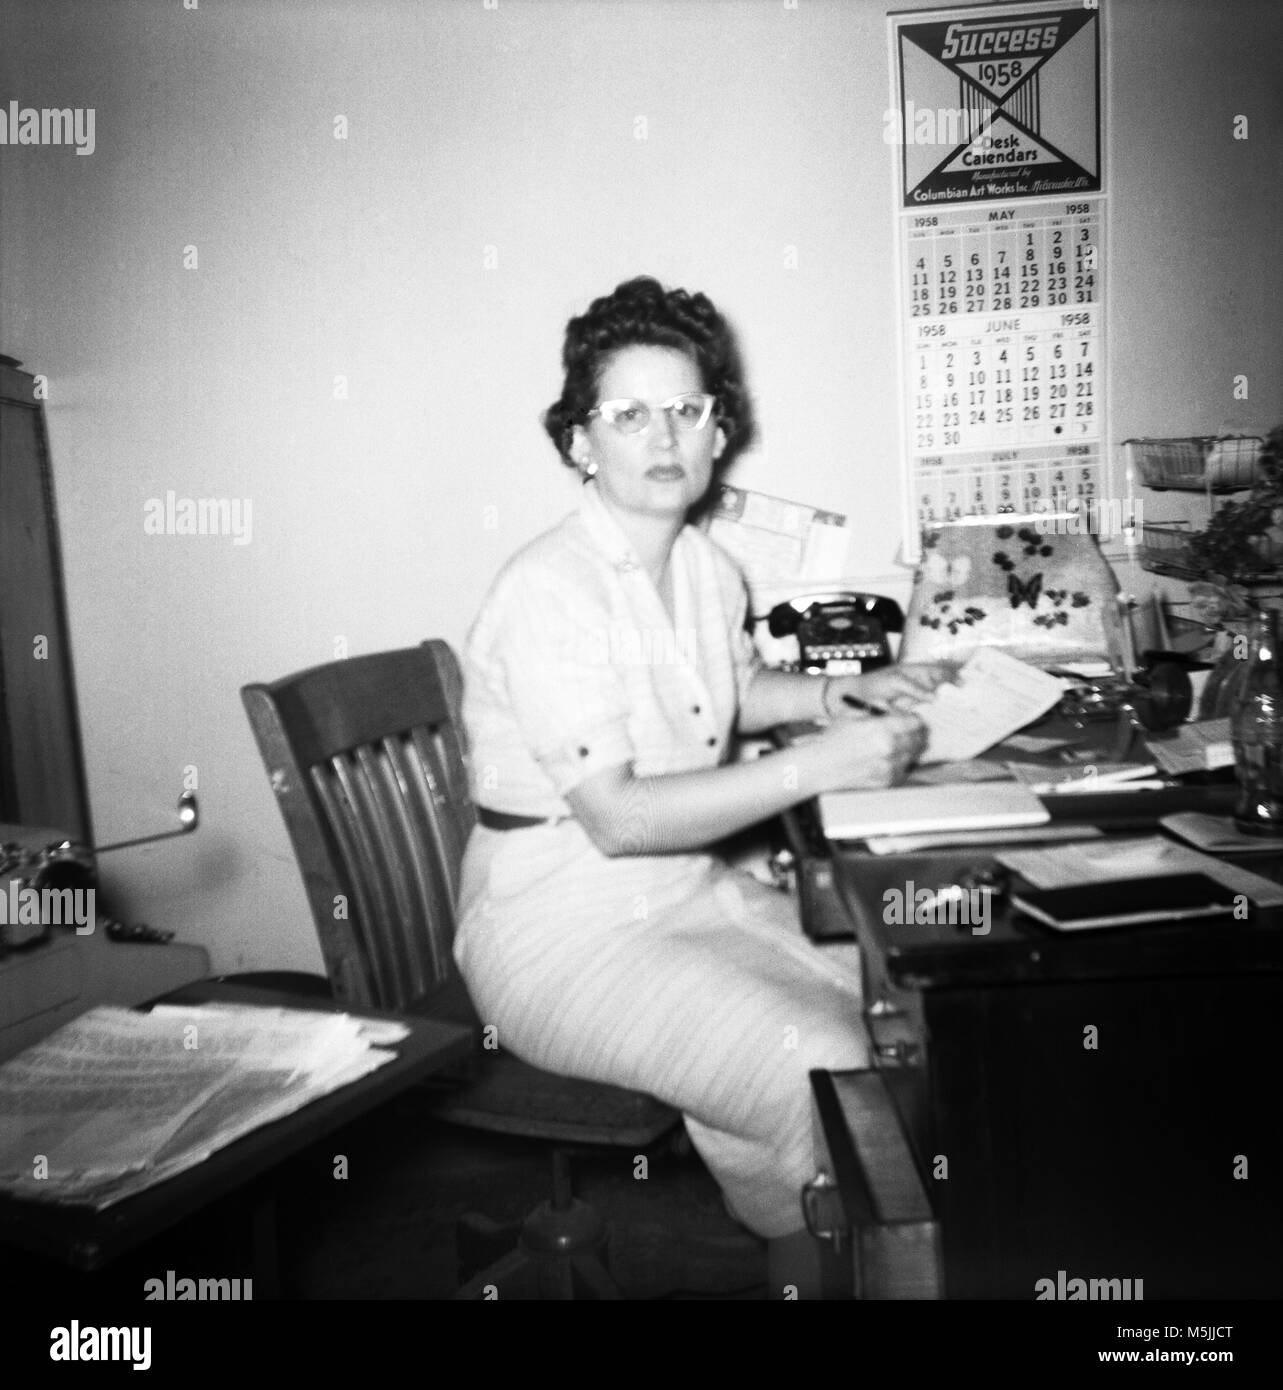 A USA office in June 1958 number 3686 Stock Photo